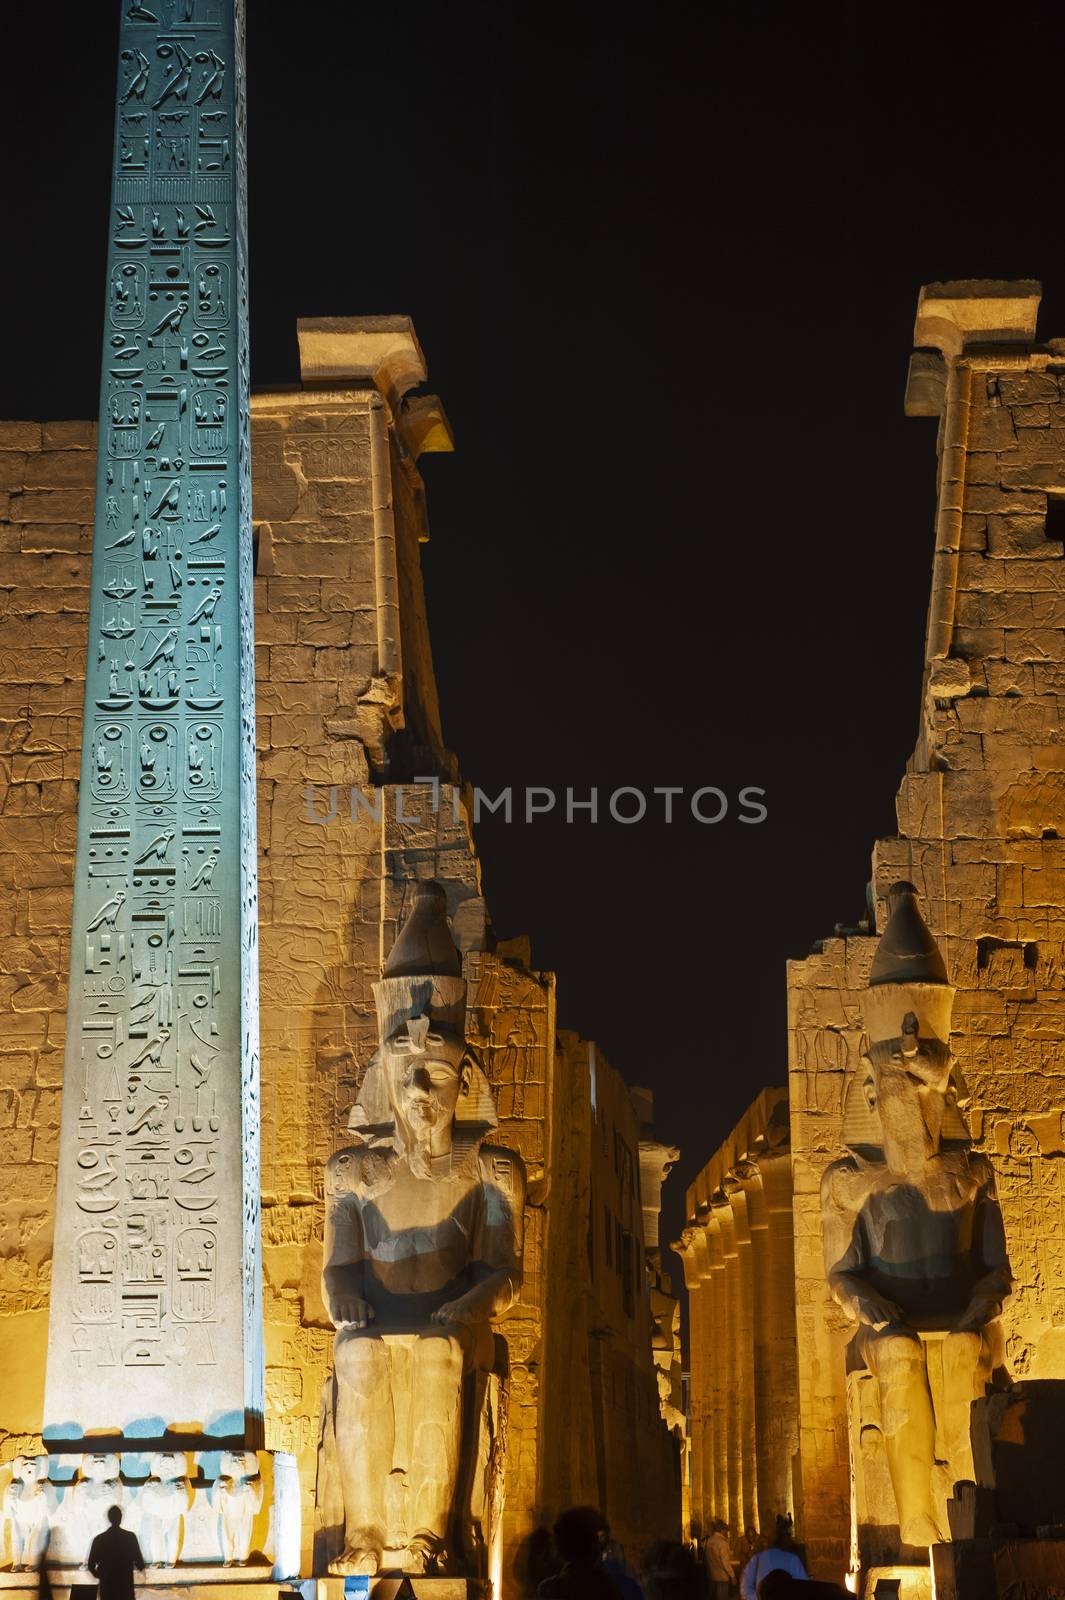 Large statue and obelisk at entrance pylon to ancient egyptian Luxor Temple lit up during night